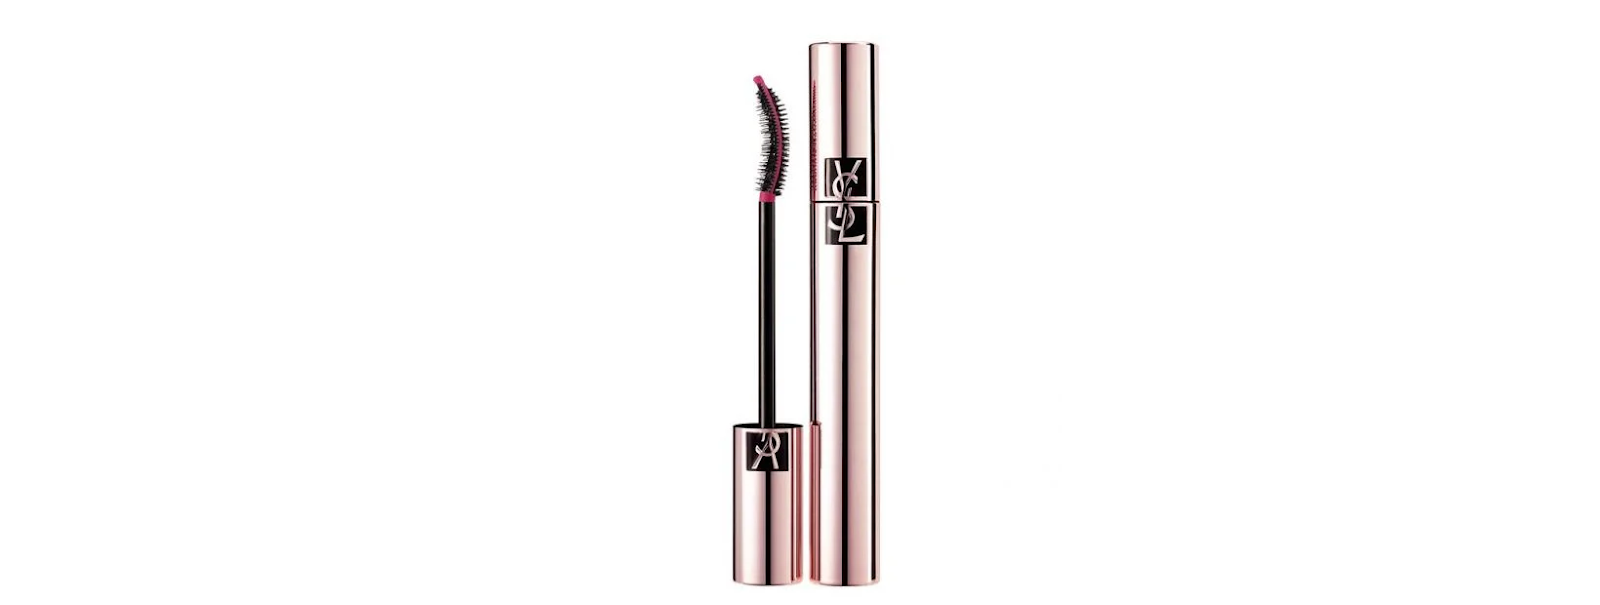 YSL Beauty Mascara Volume Effet Faux Cils The Curler